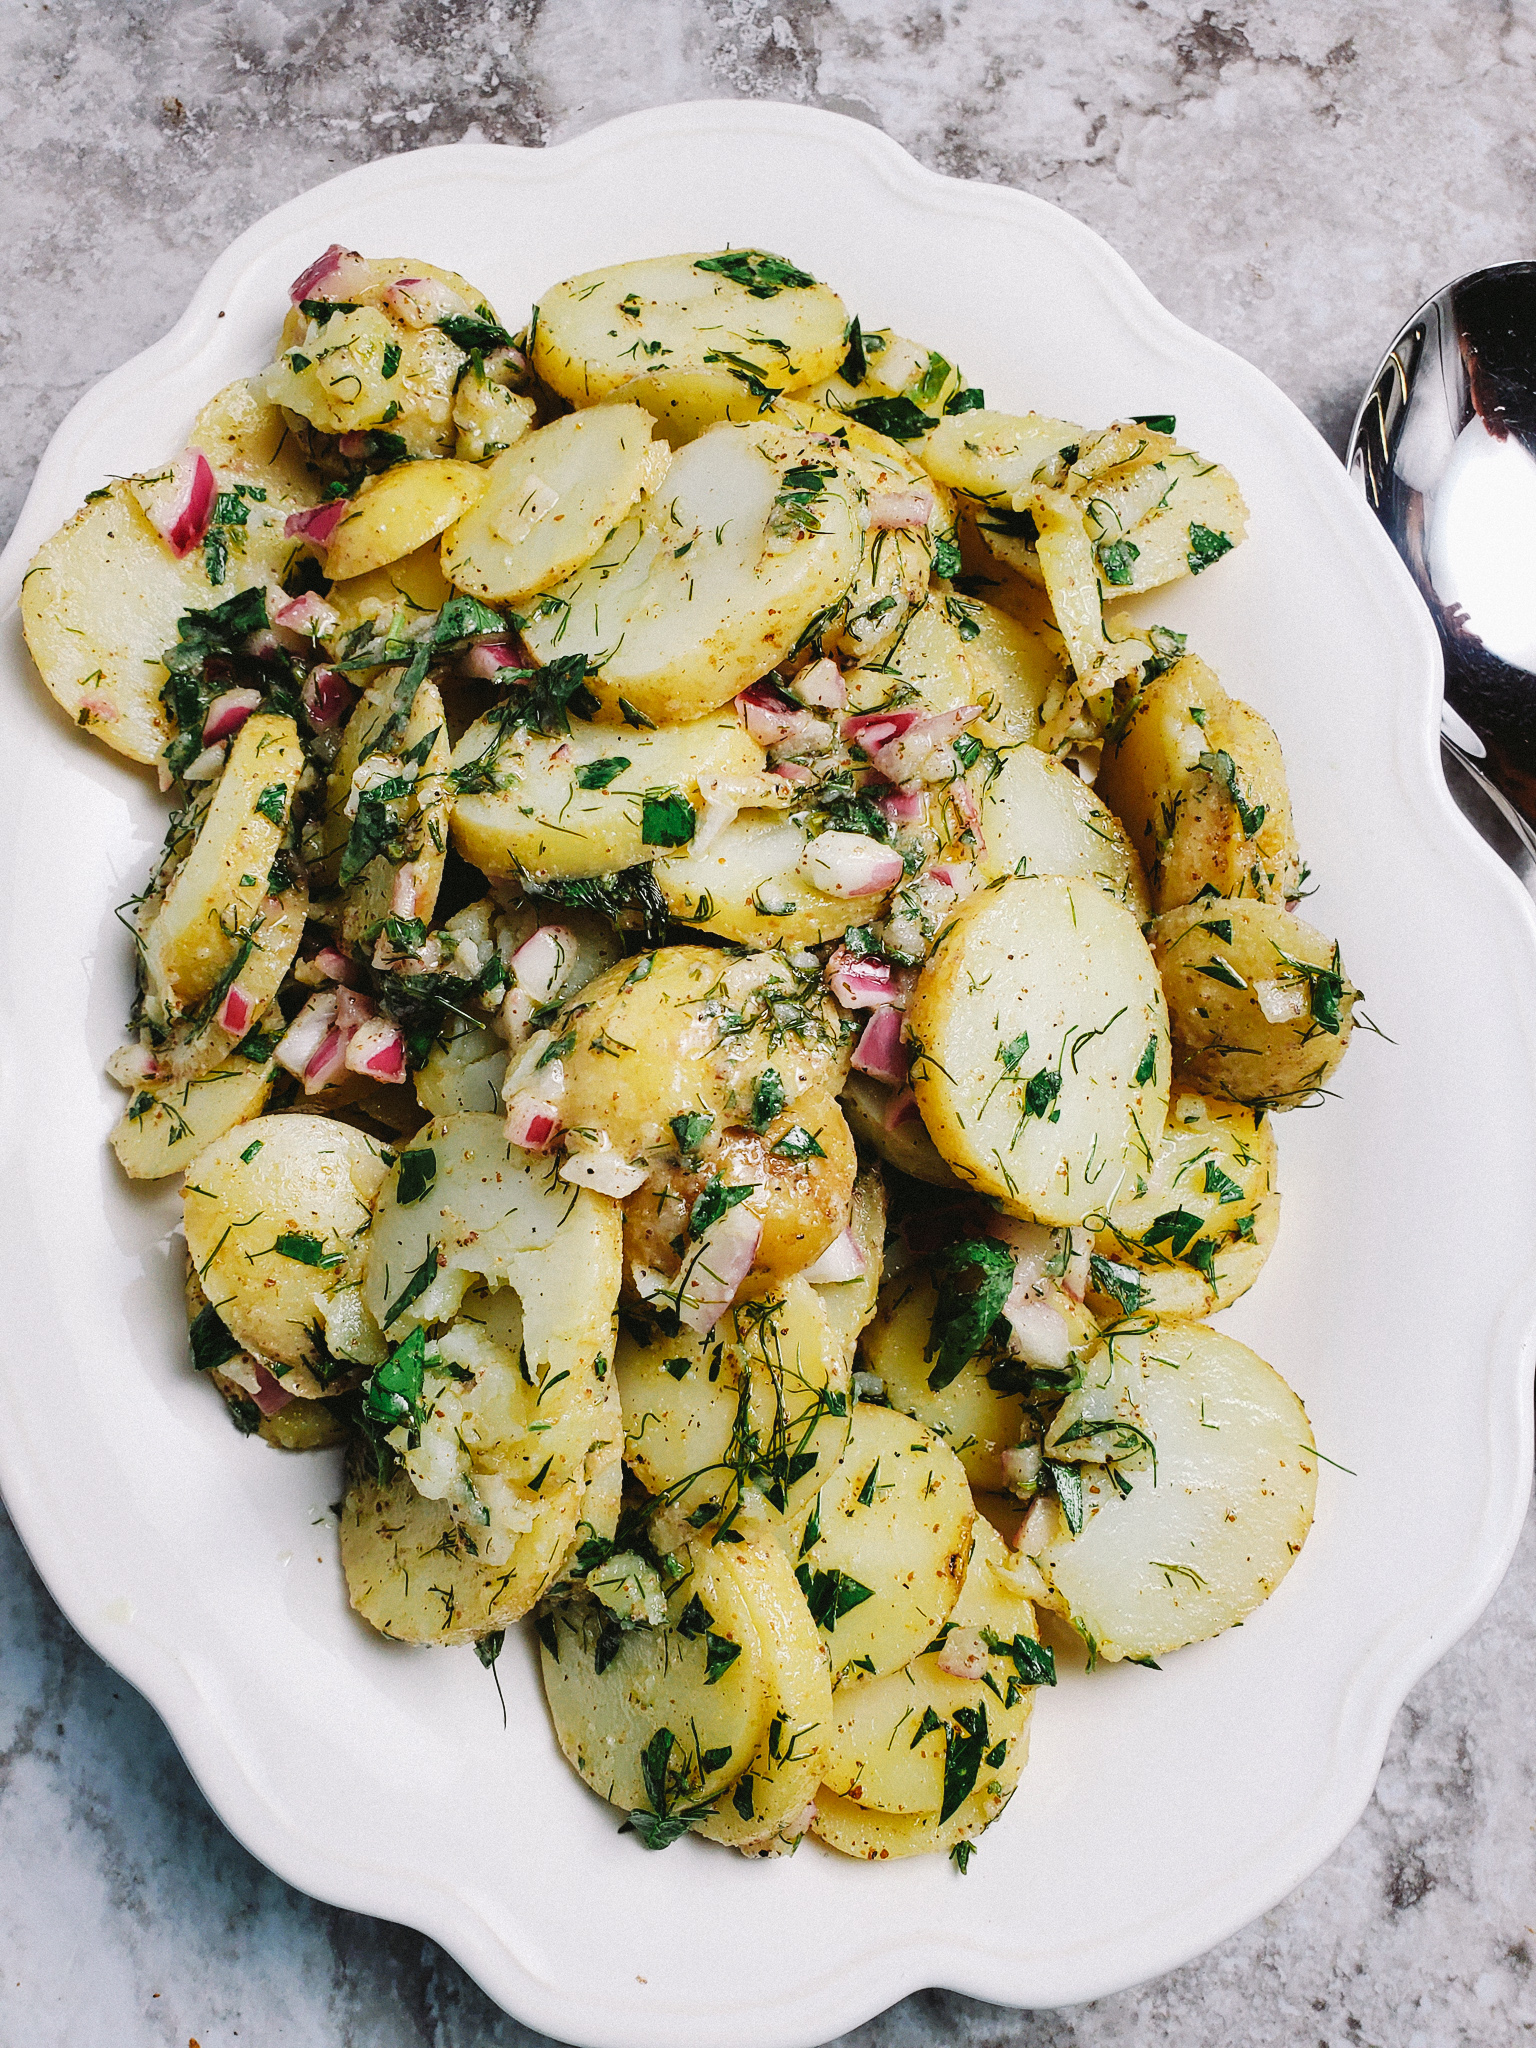 Slice of Southern: Light and Healthy Mediterranean Style Potato Salad